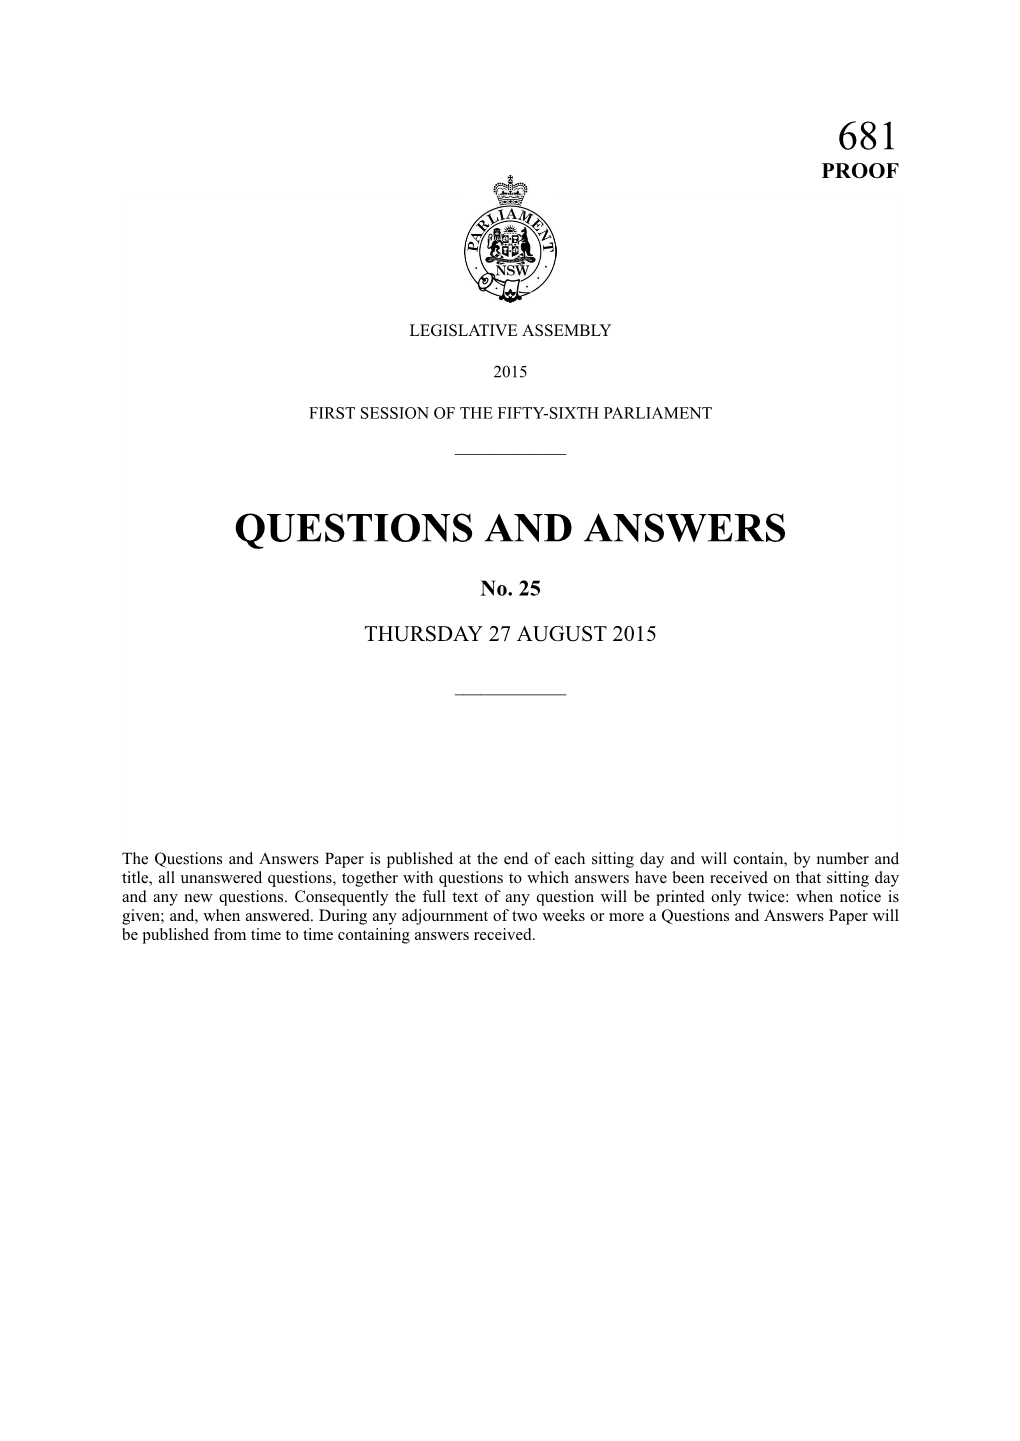 Questions & Answers Paper No. 25